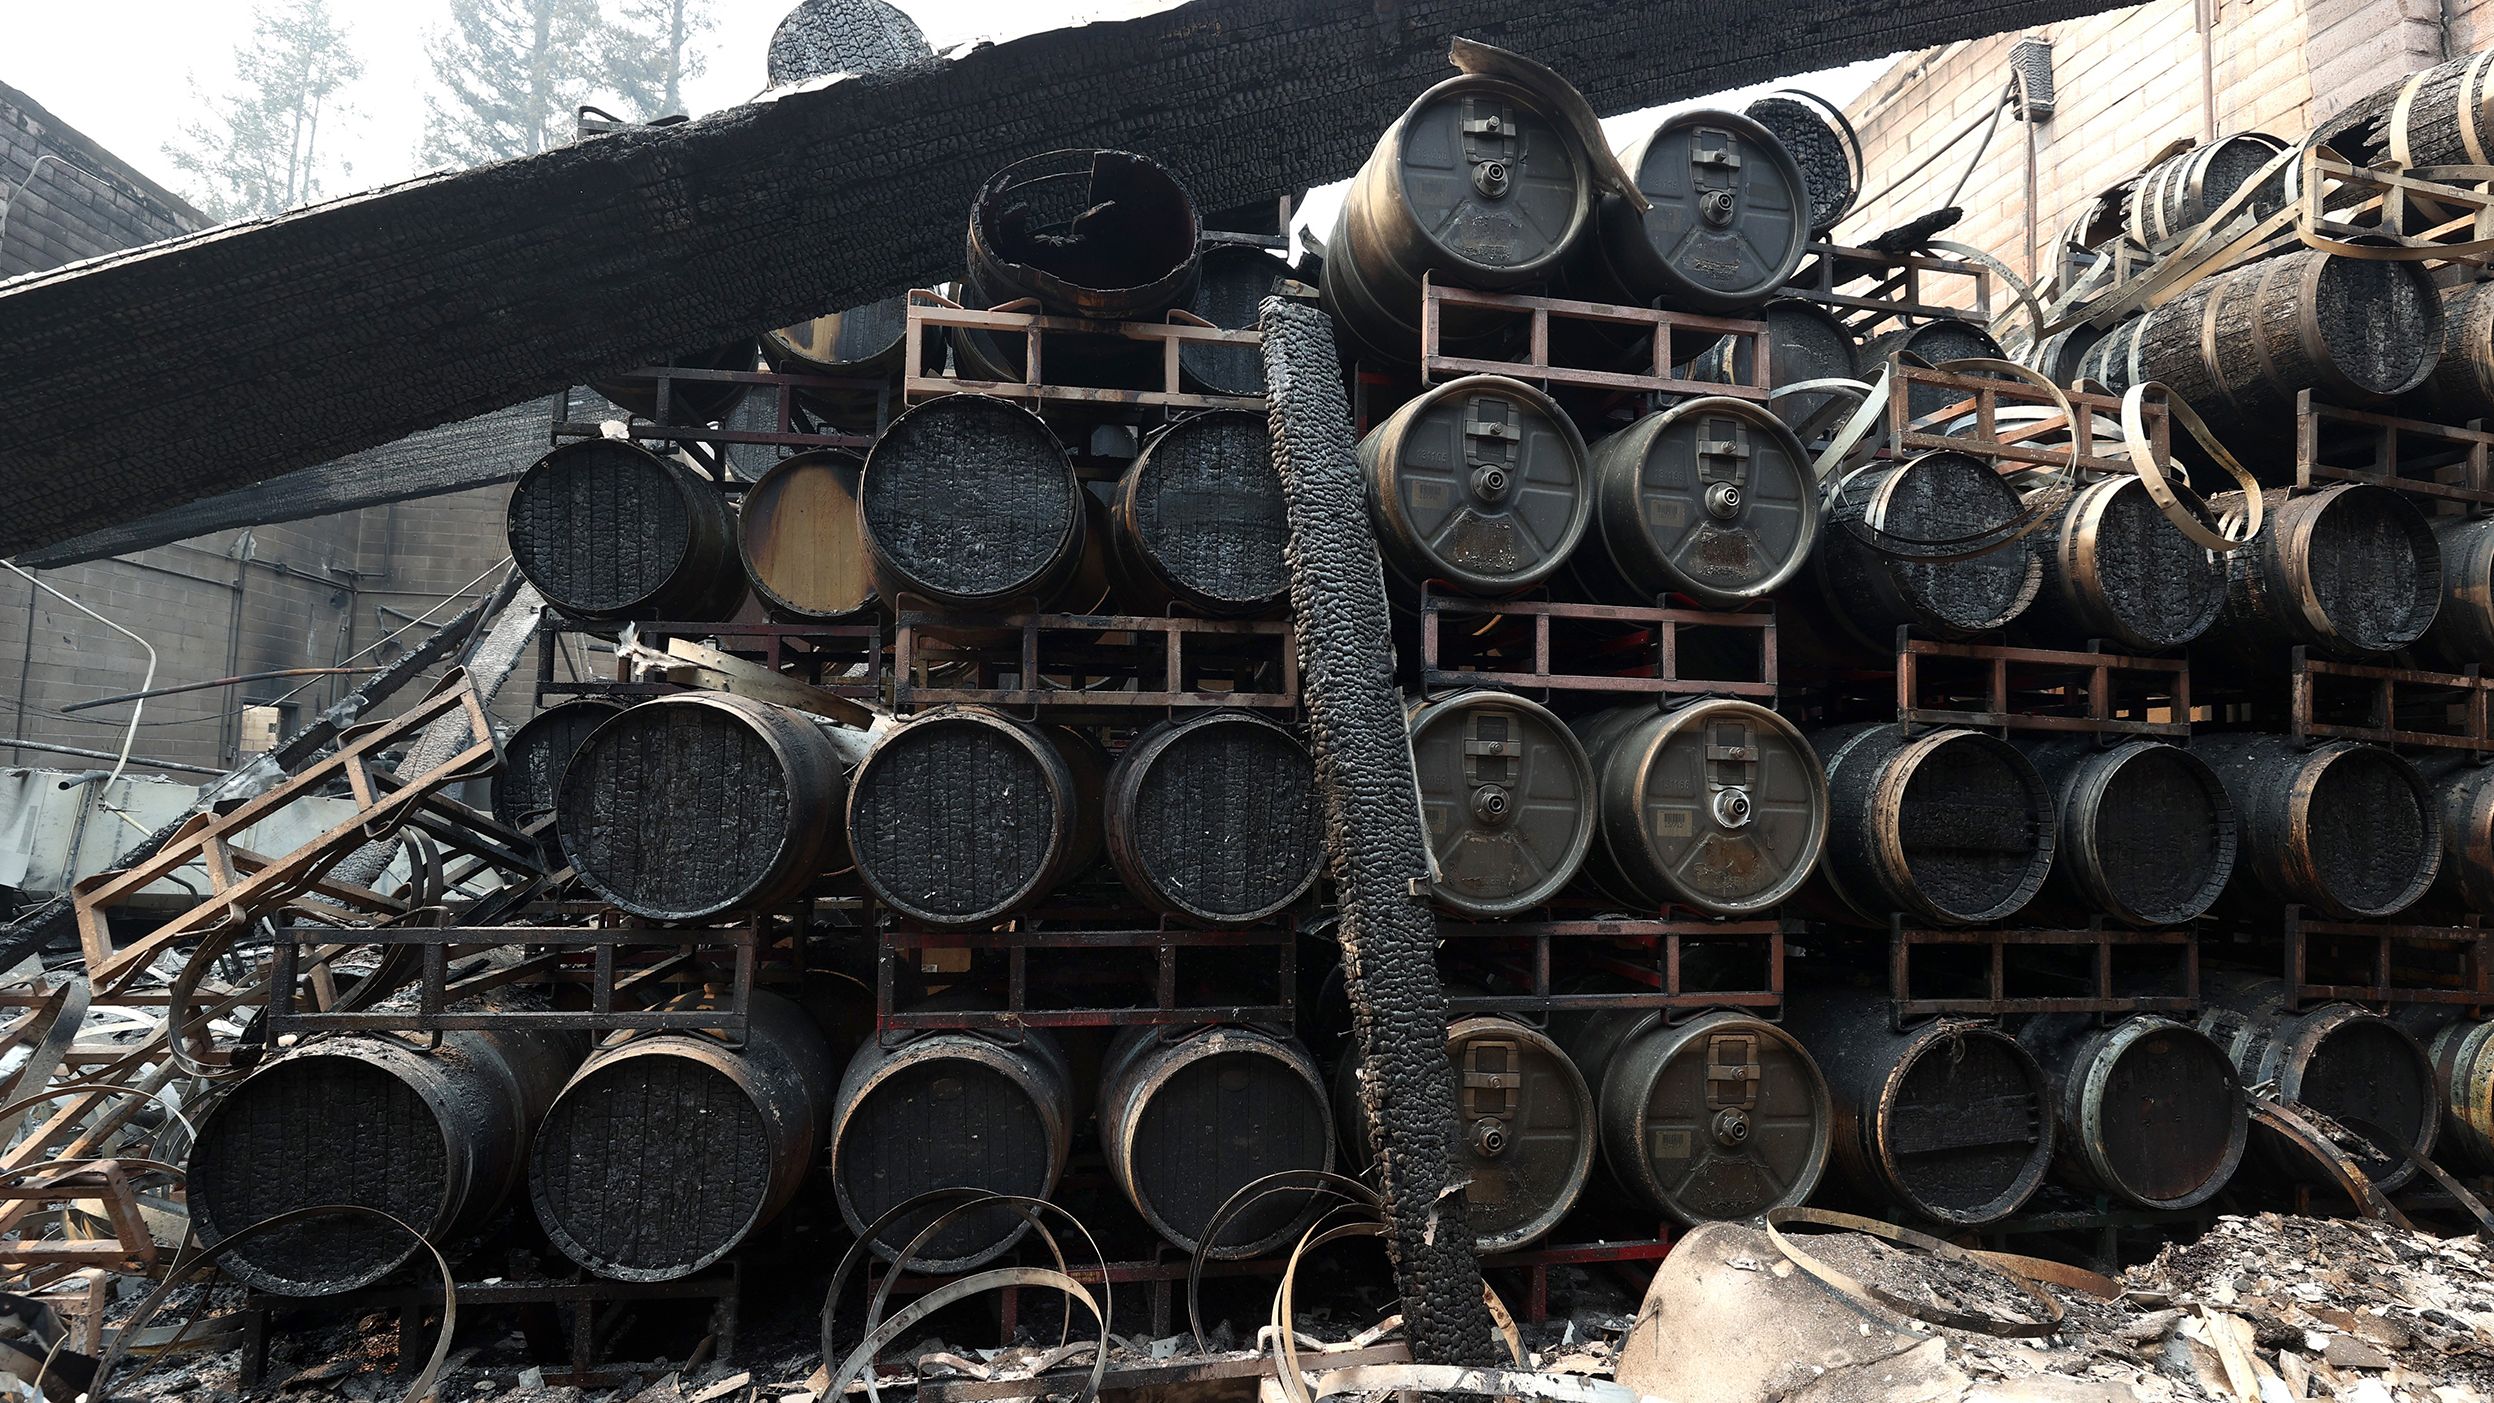 Damaged wine barrels sit stacked at the Fairwinds Estate Winery in Calistoga on September 29, 2020.